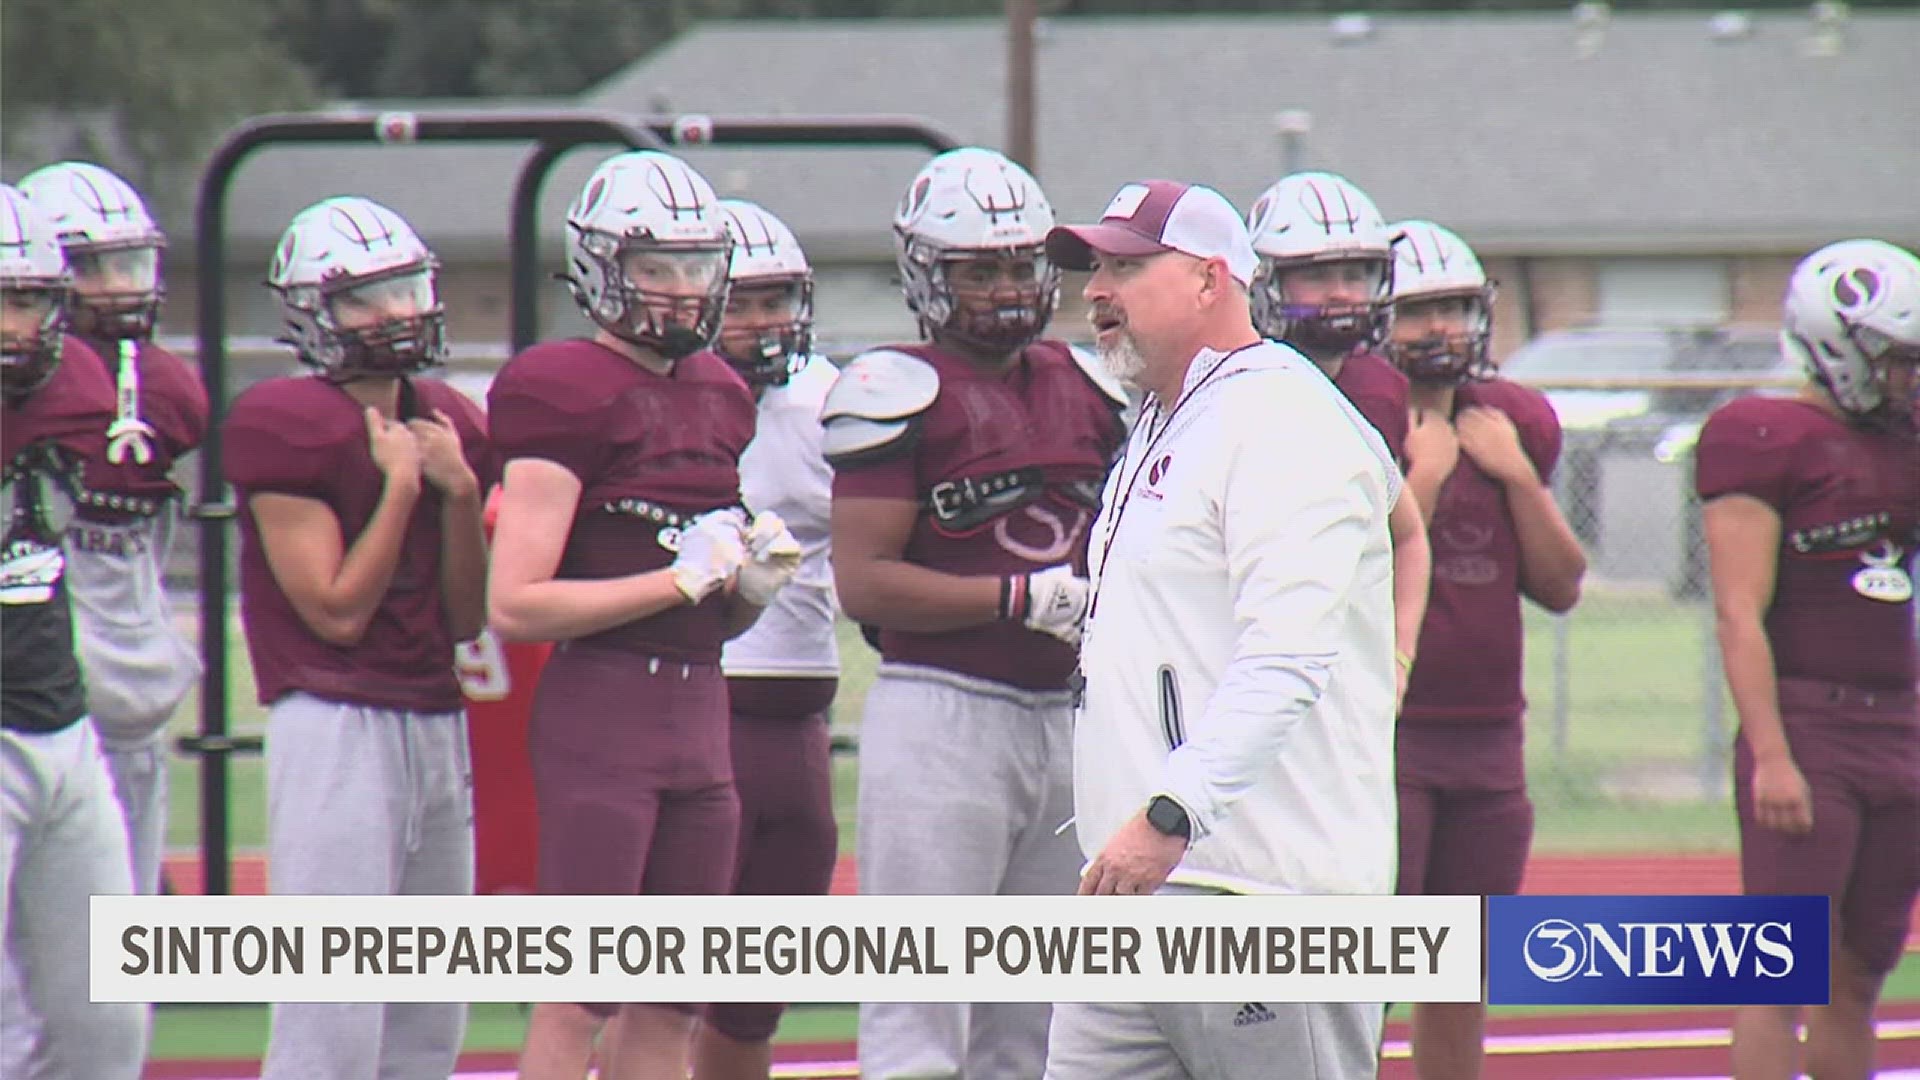 The Pirates (10-2) have reeled off nine straight wins after a rough start. They'll need to play near mistake-free football to top #5 Wimberley (13-0).